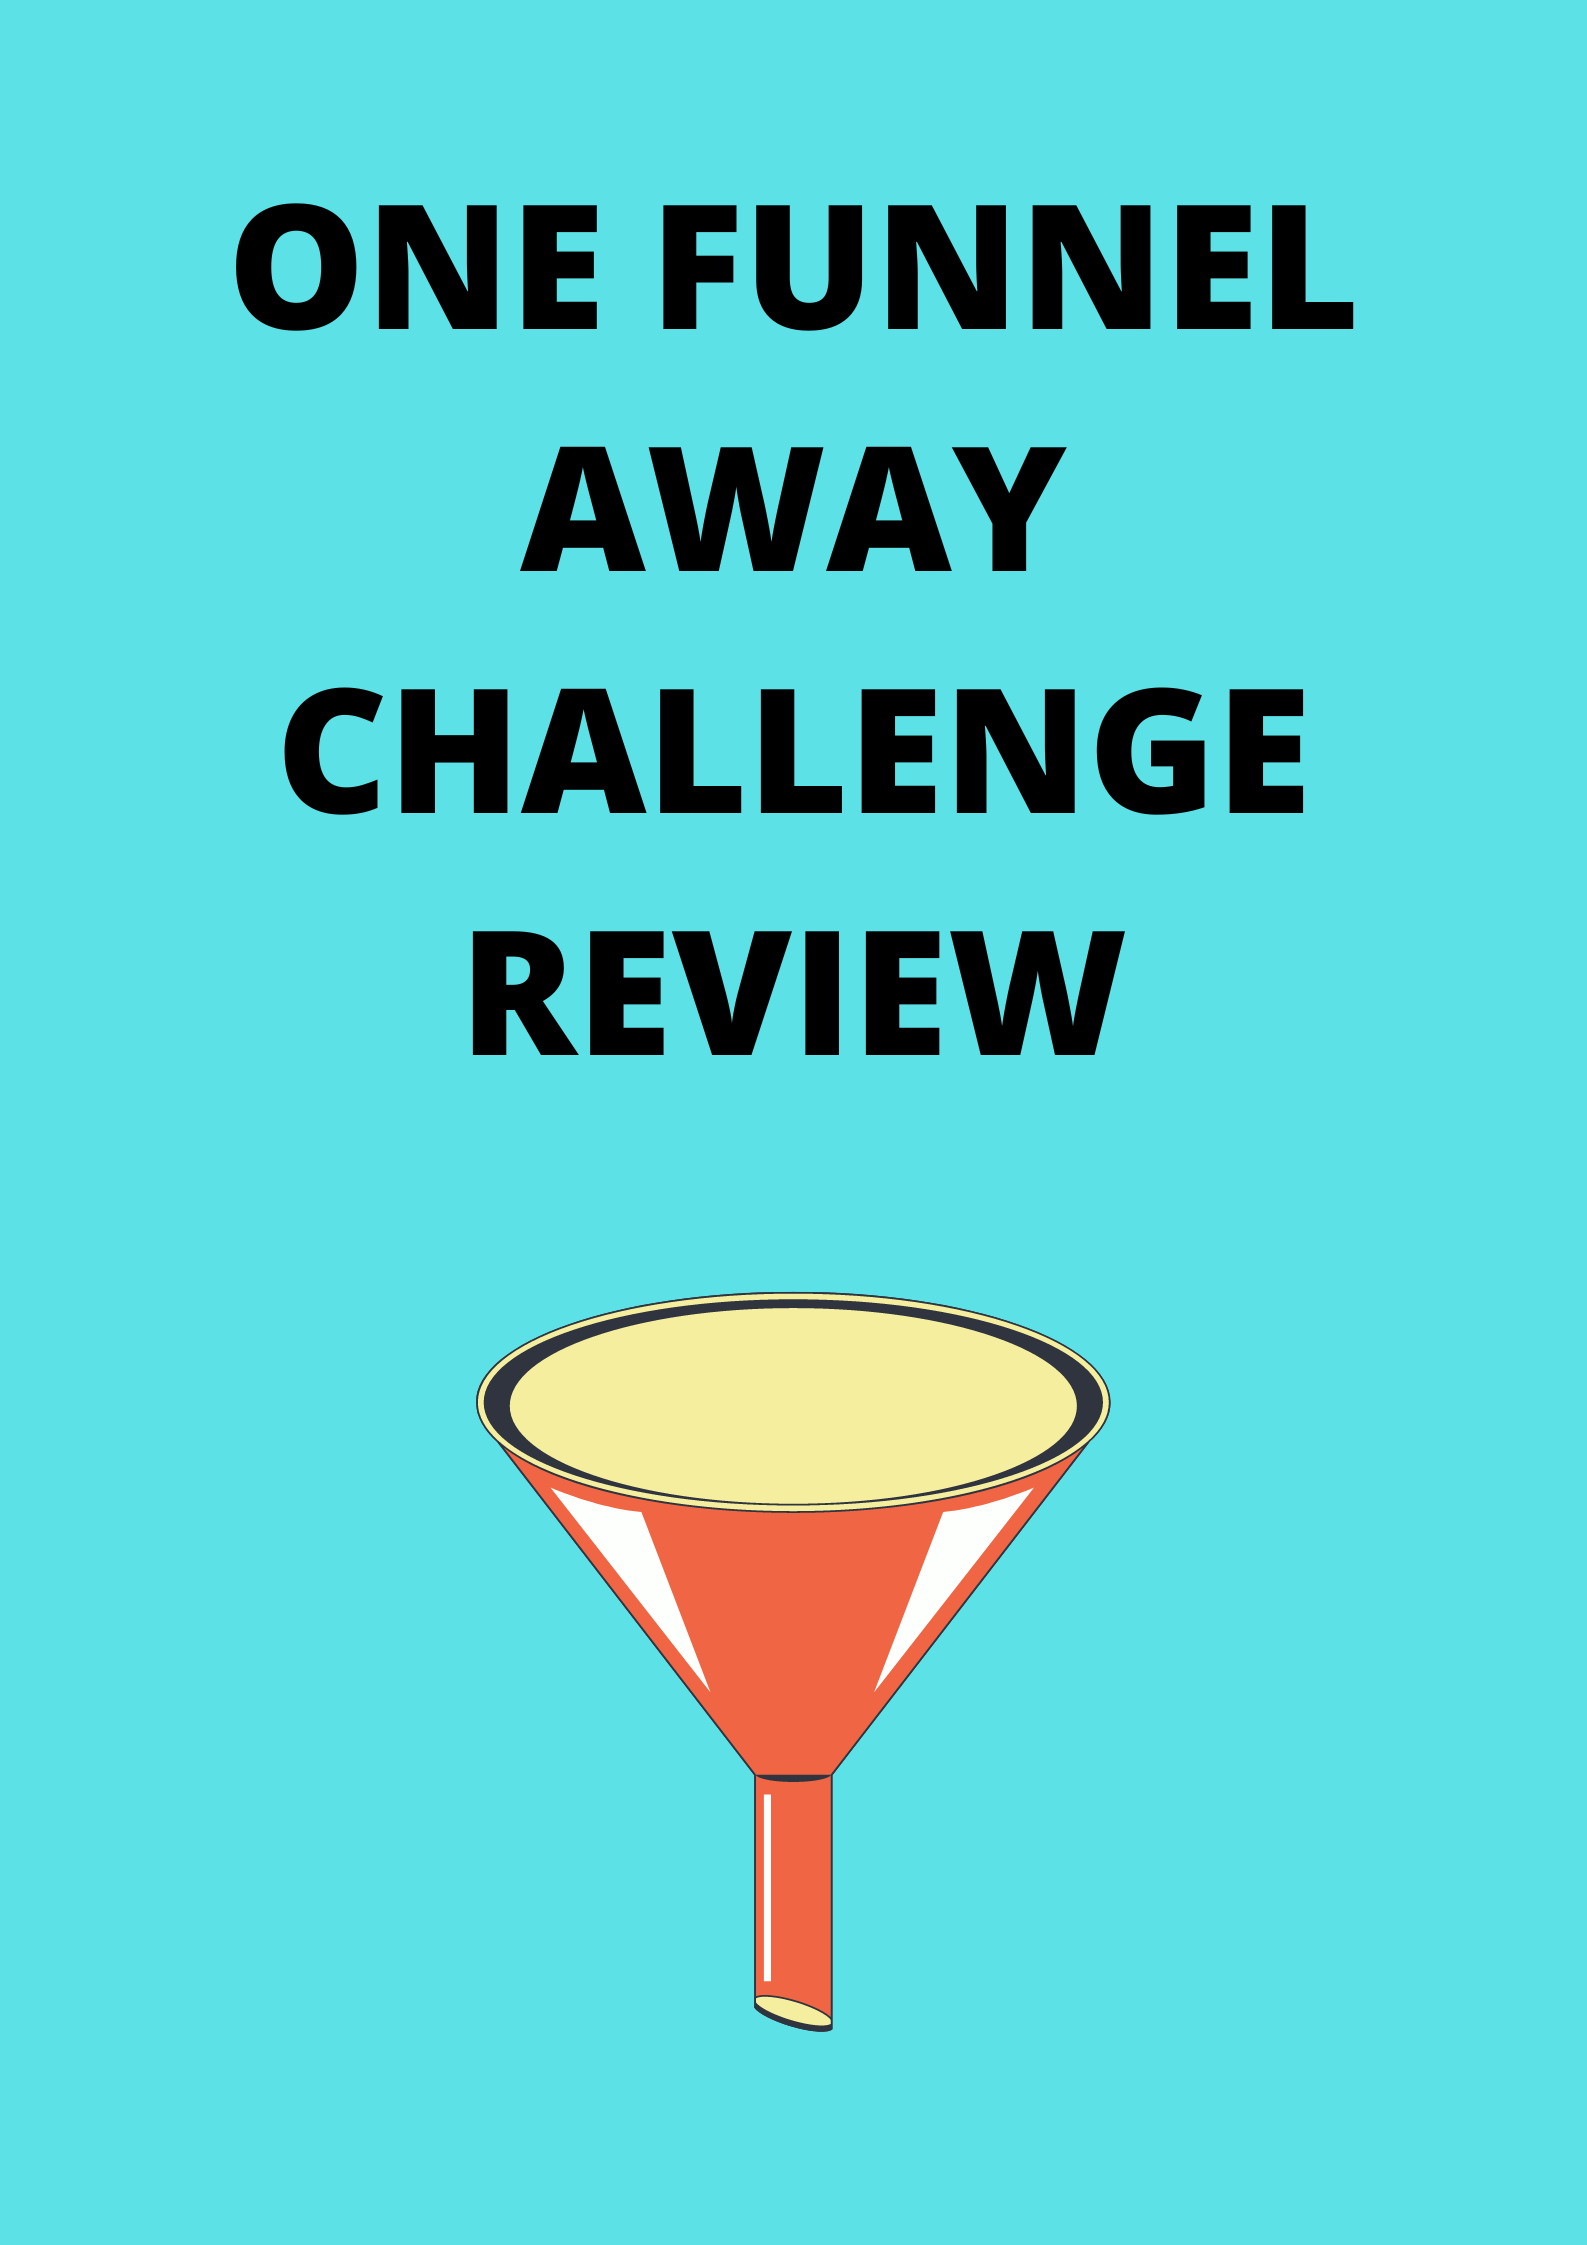 One funnel away challenge review